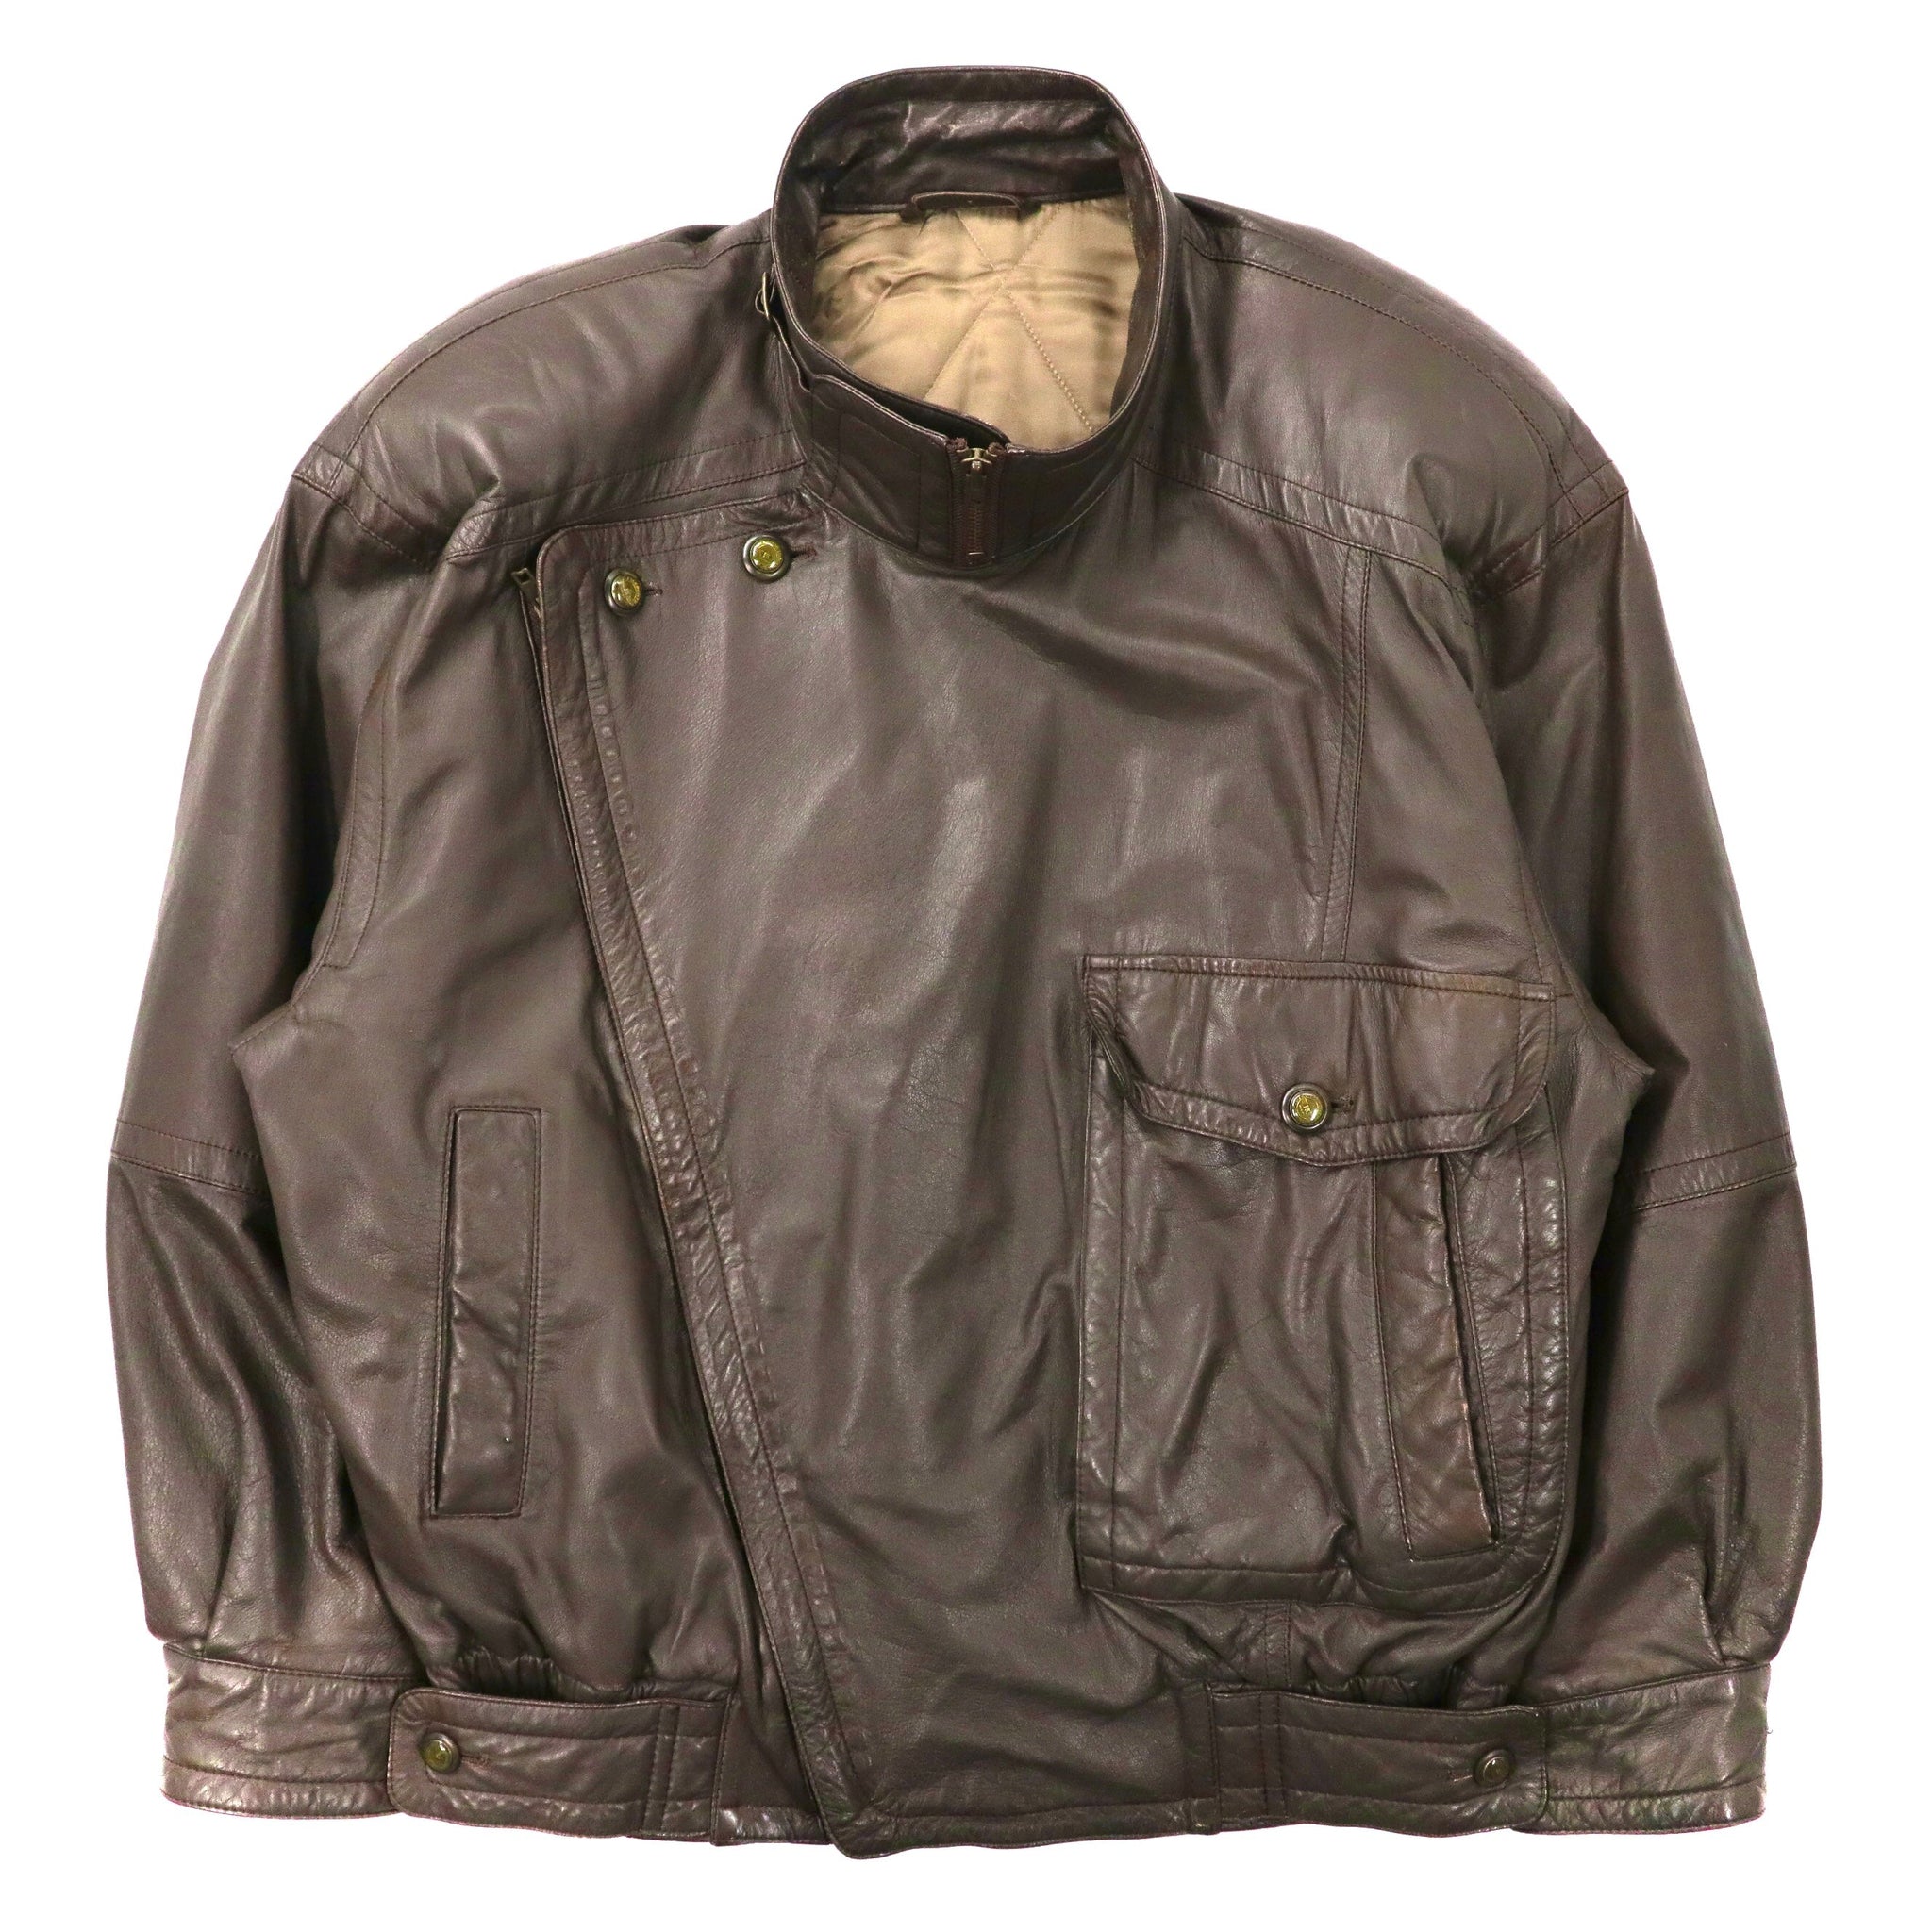 Pia Sports Leather Bomber Jacket 4 Brown Lamb Leather Leather